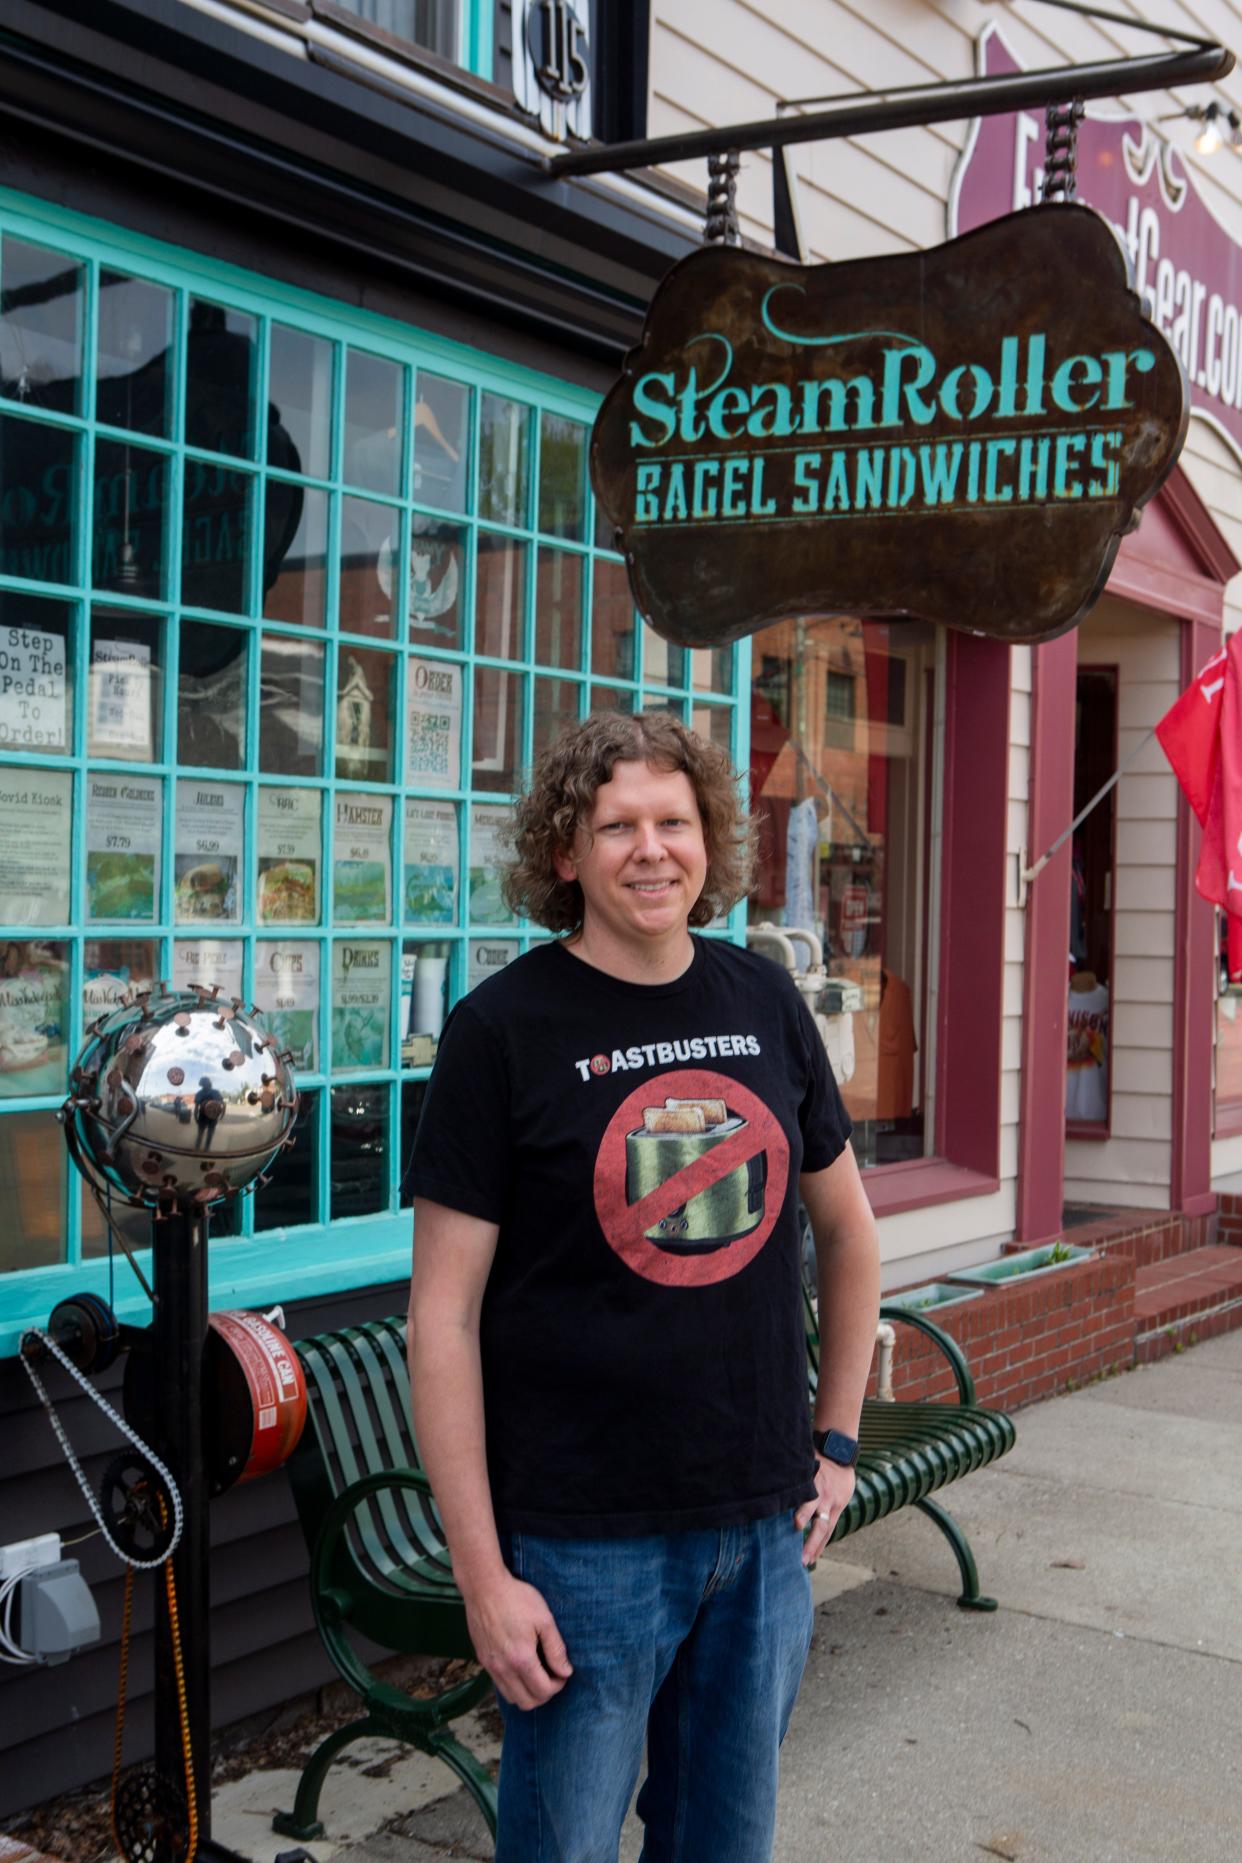 Jay Snyder, owner of SteamRoller Bagel Sandwiches, stands out in front of the SteamRoller Bagel Sandwich Shop in downtown Granville, Ohio on April 20, 2021. Snyder recently announced he plans to close the business in December.